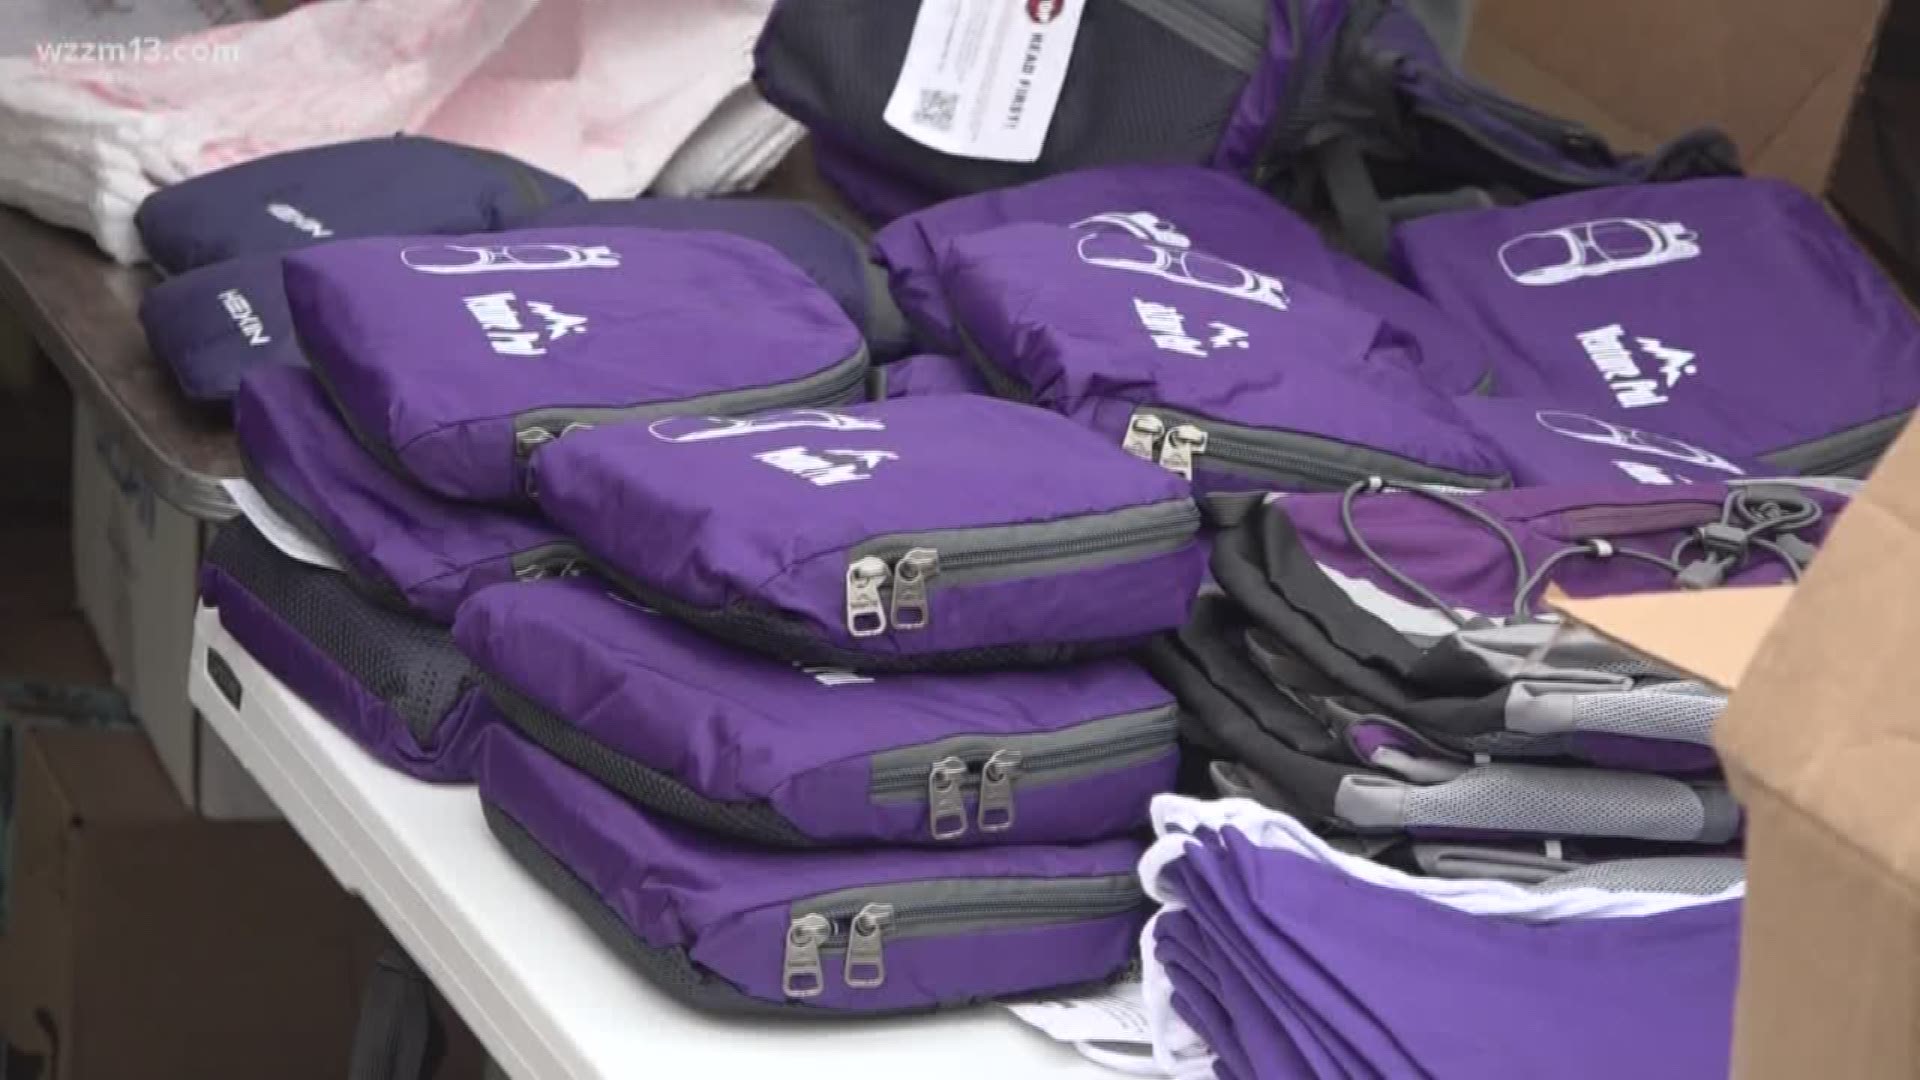 Winter gear given to homeless people in Grand Rapids